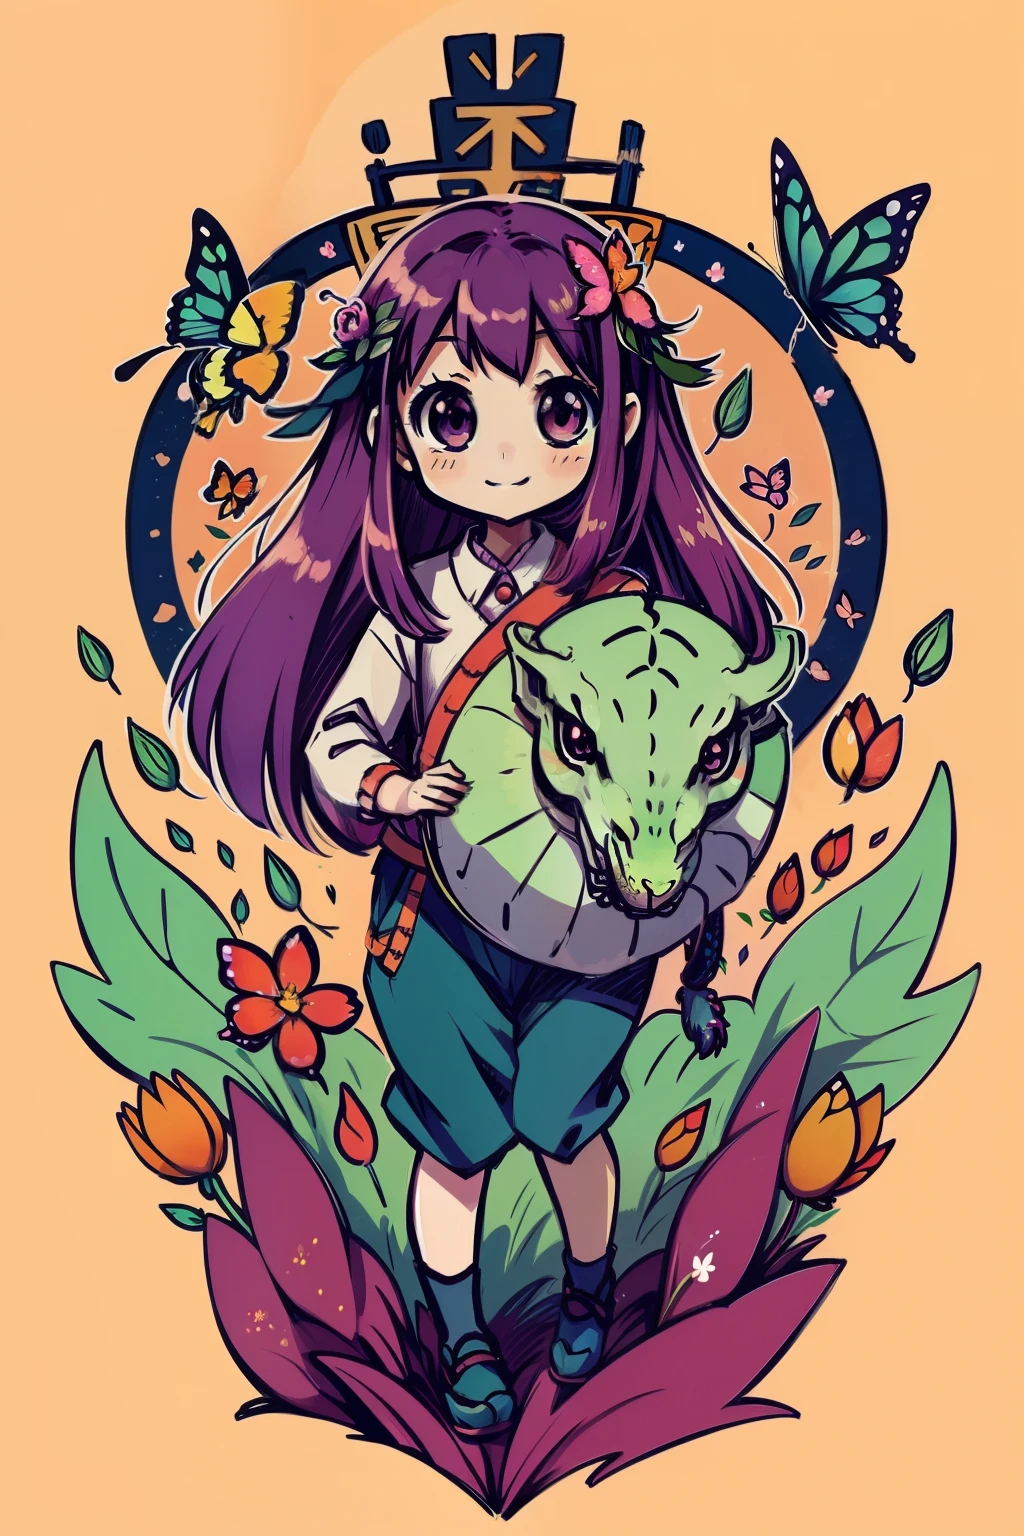  Reiko , happiness , inspiration from anime: A 5,000-year-old herbivorous dragon is being unjustly evil, forest , flower , butterfly fullcolor